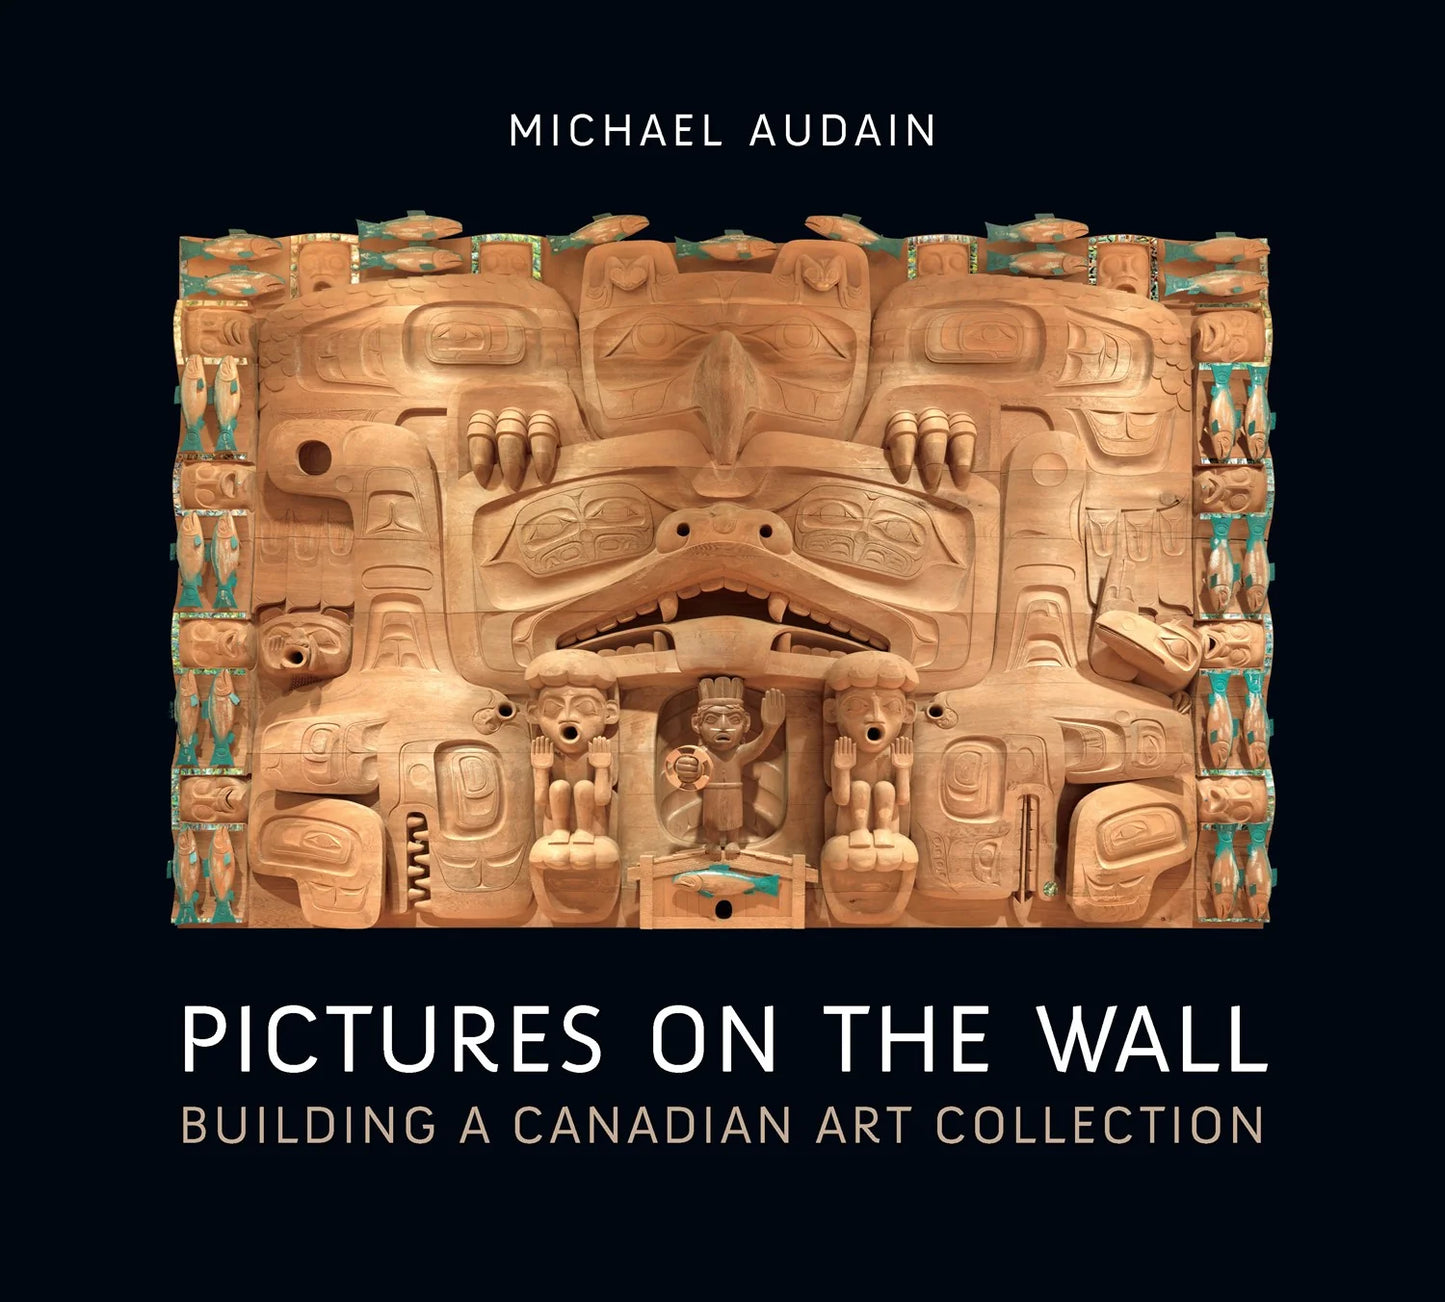 PICTURES ON THE WALL: BUILDING A CANADIAN ART COLLECTION